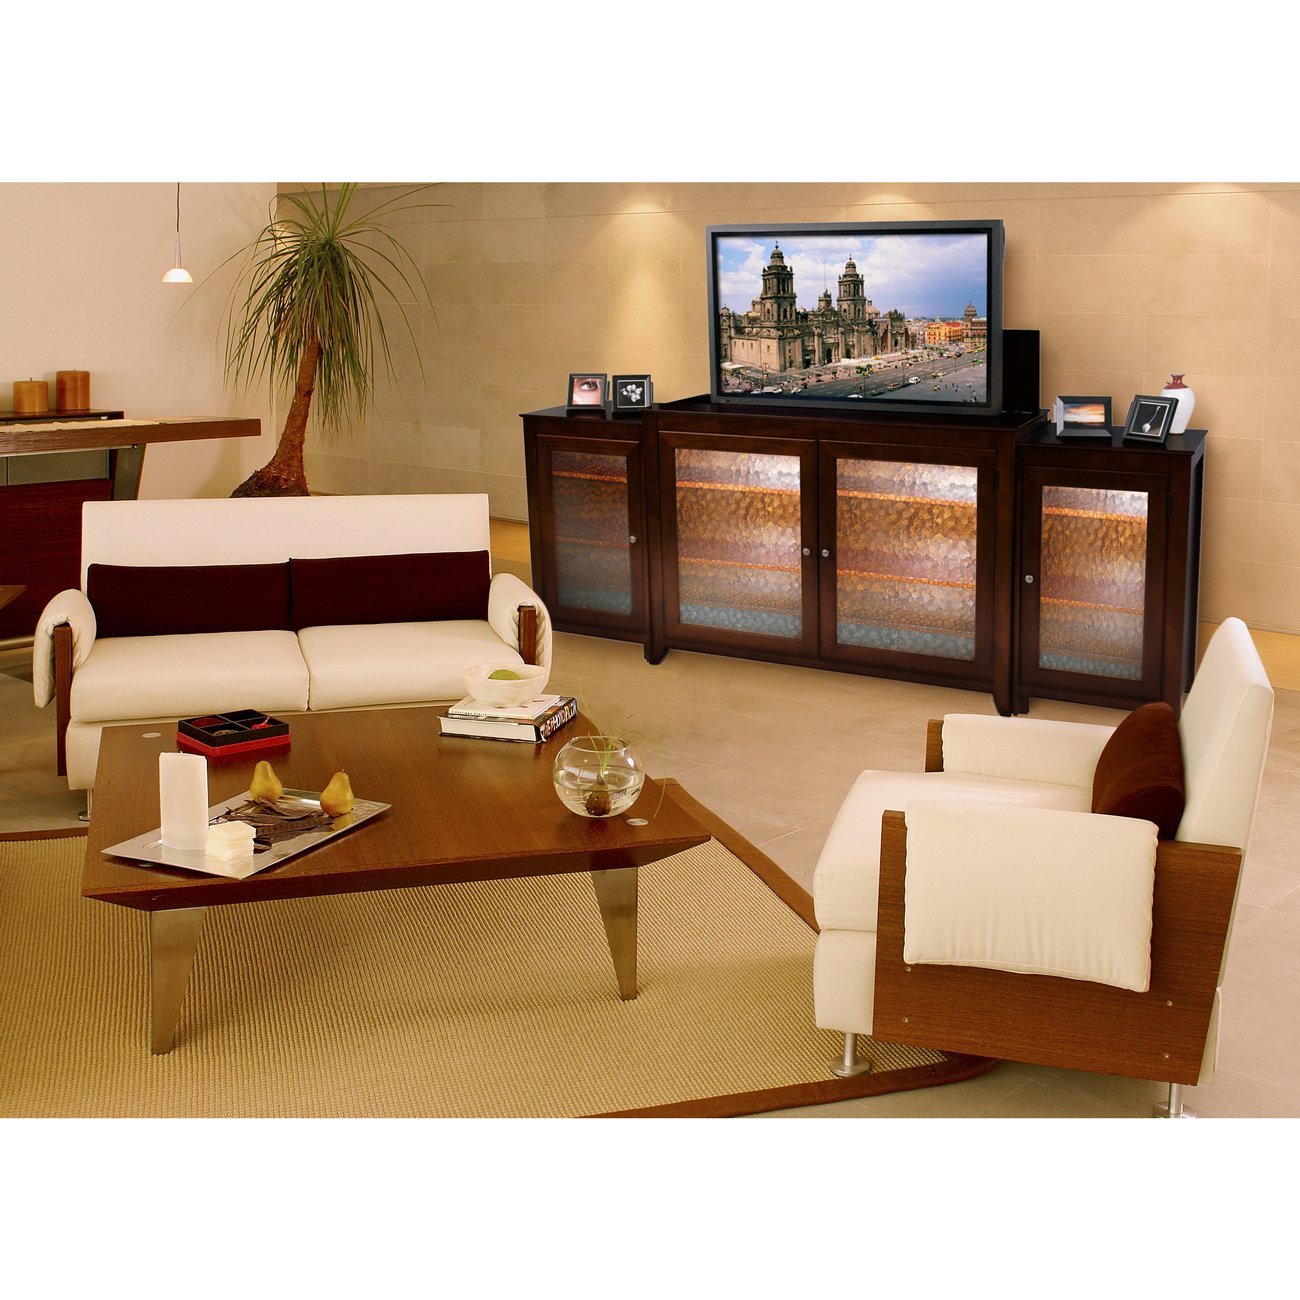 Pop Up Tv Cabinet Guide For Cheap Pop Up TV Cabinet Online